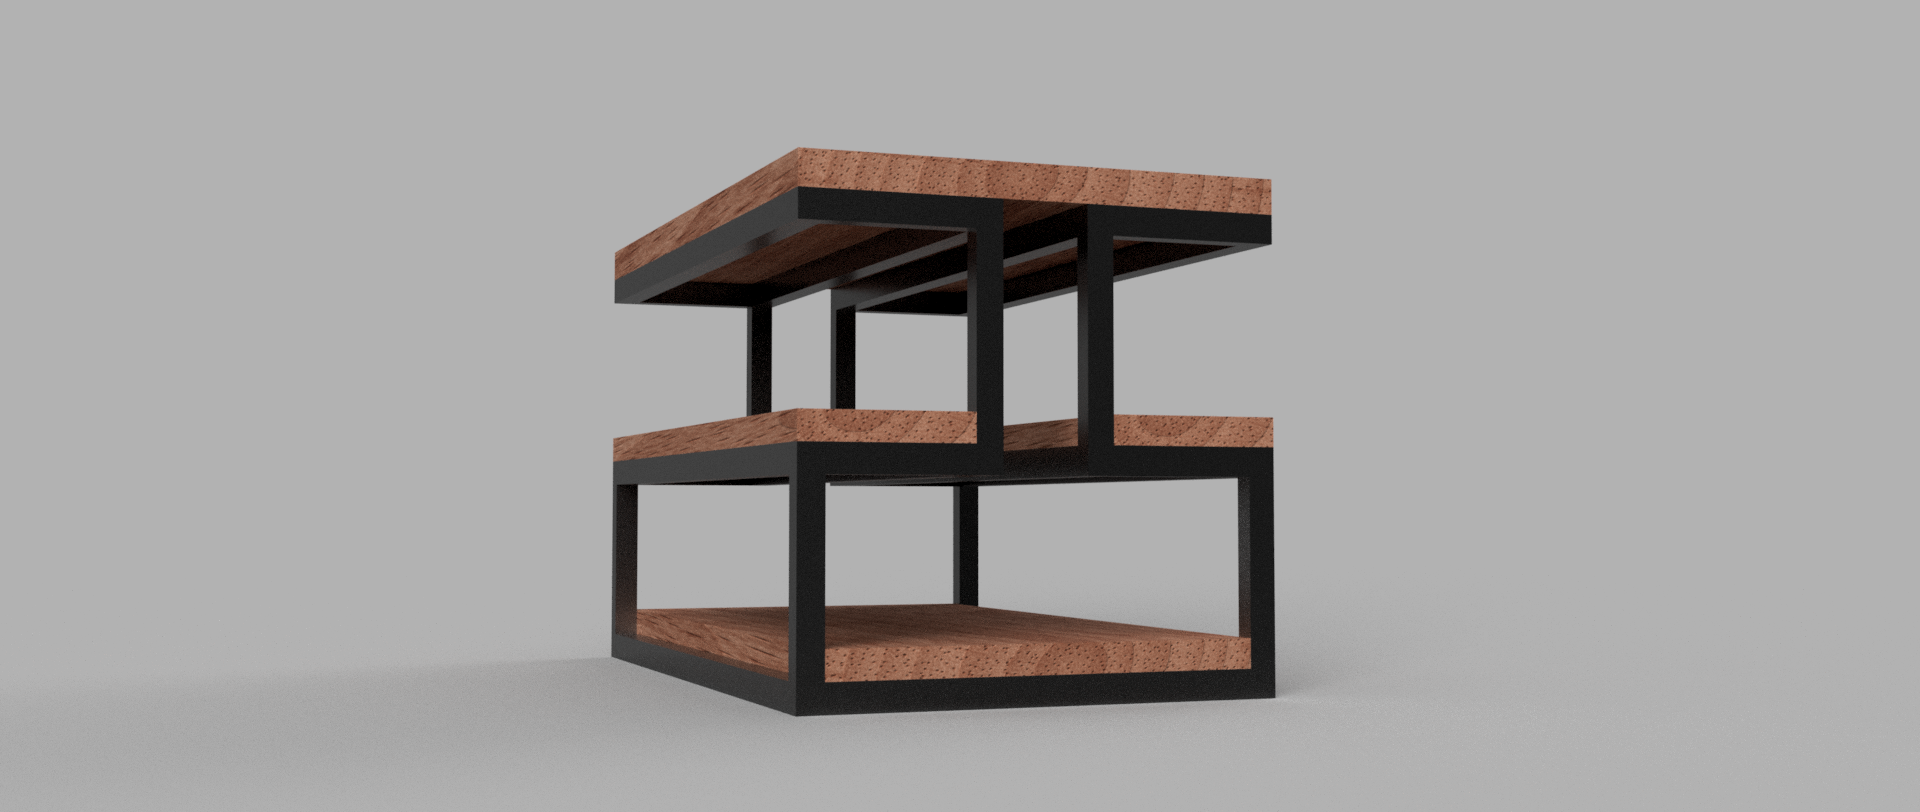 Bottom view wooden table.png